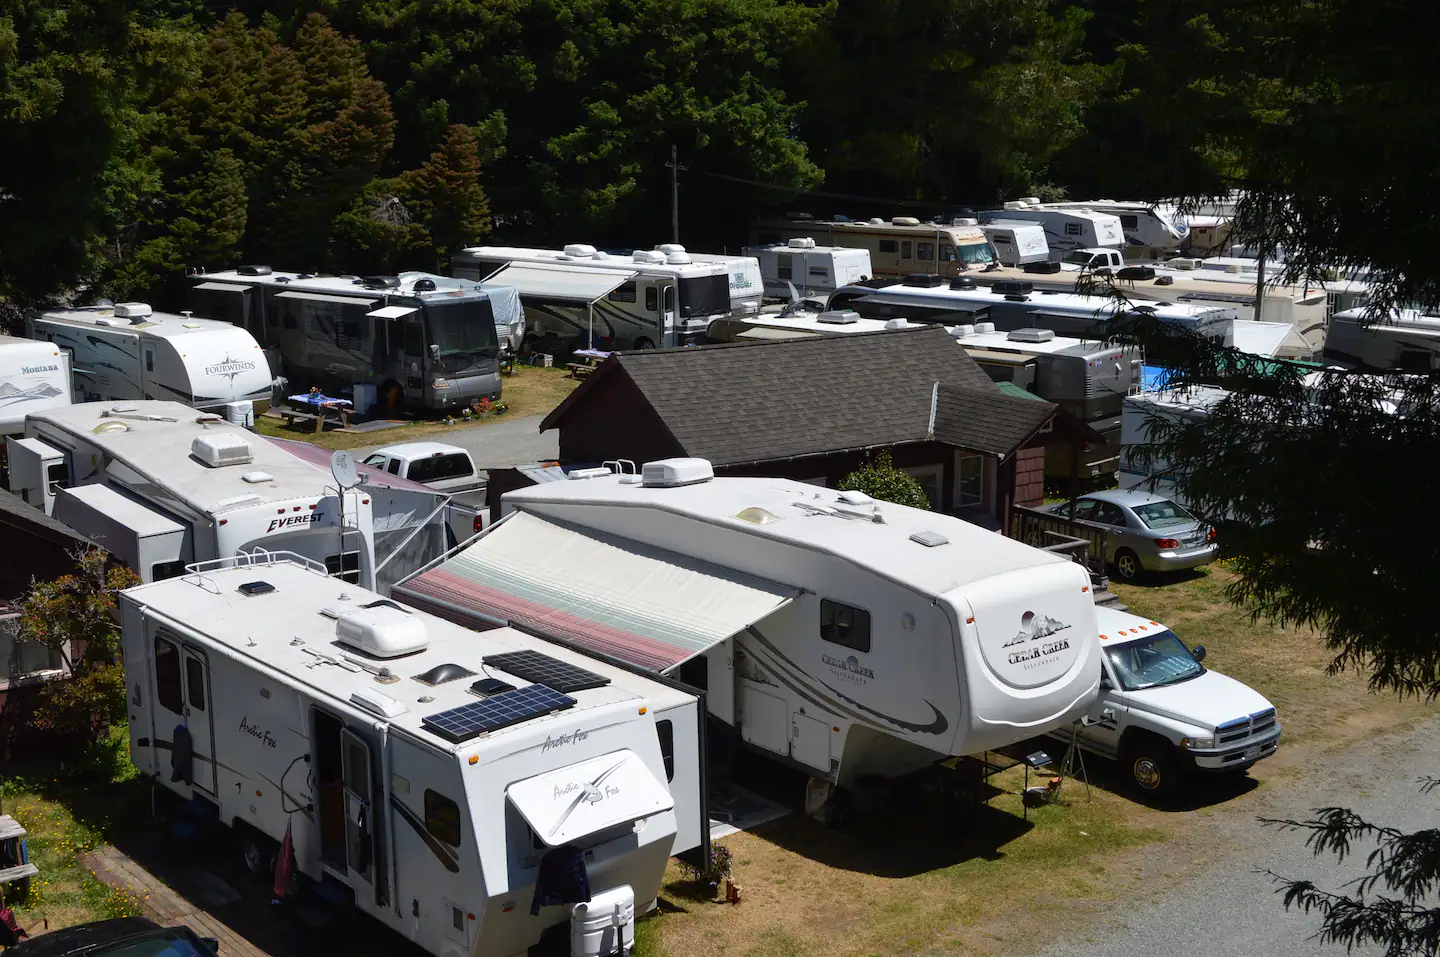 May through September we have RV campers near the cabins. Here is Cabin 3 in peak RV season.